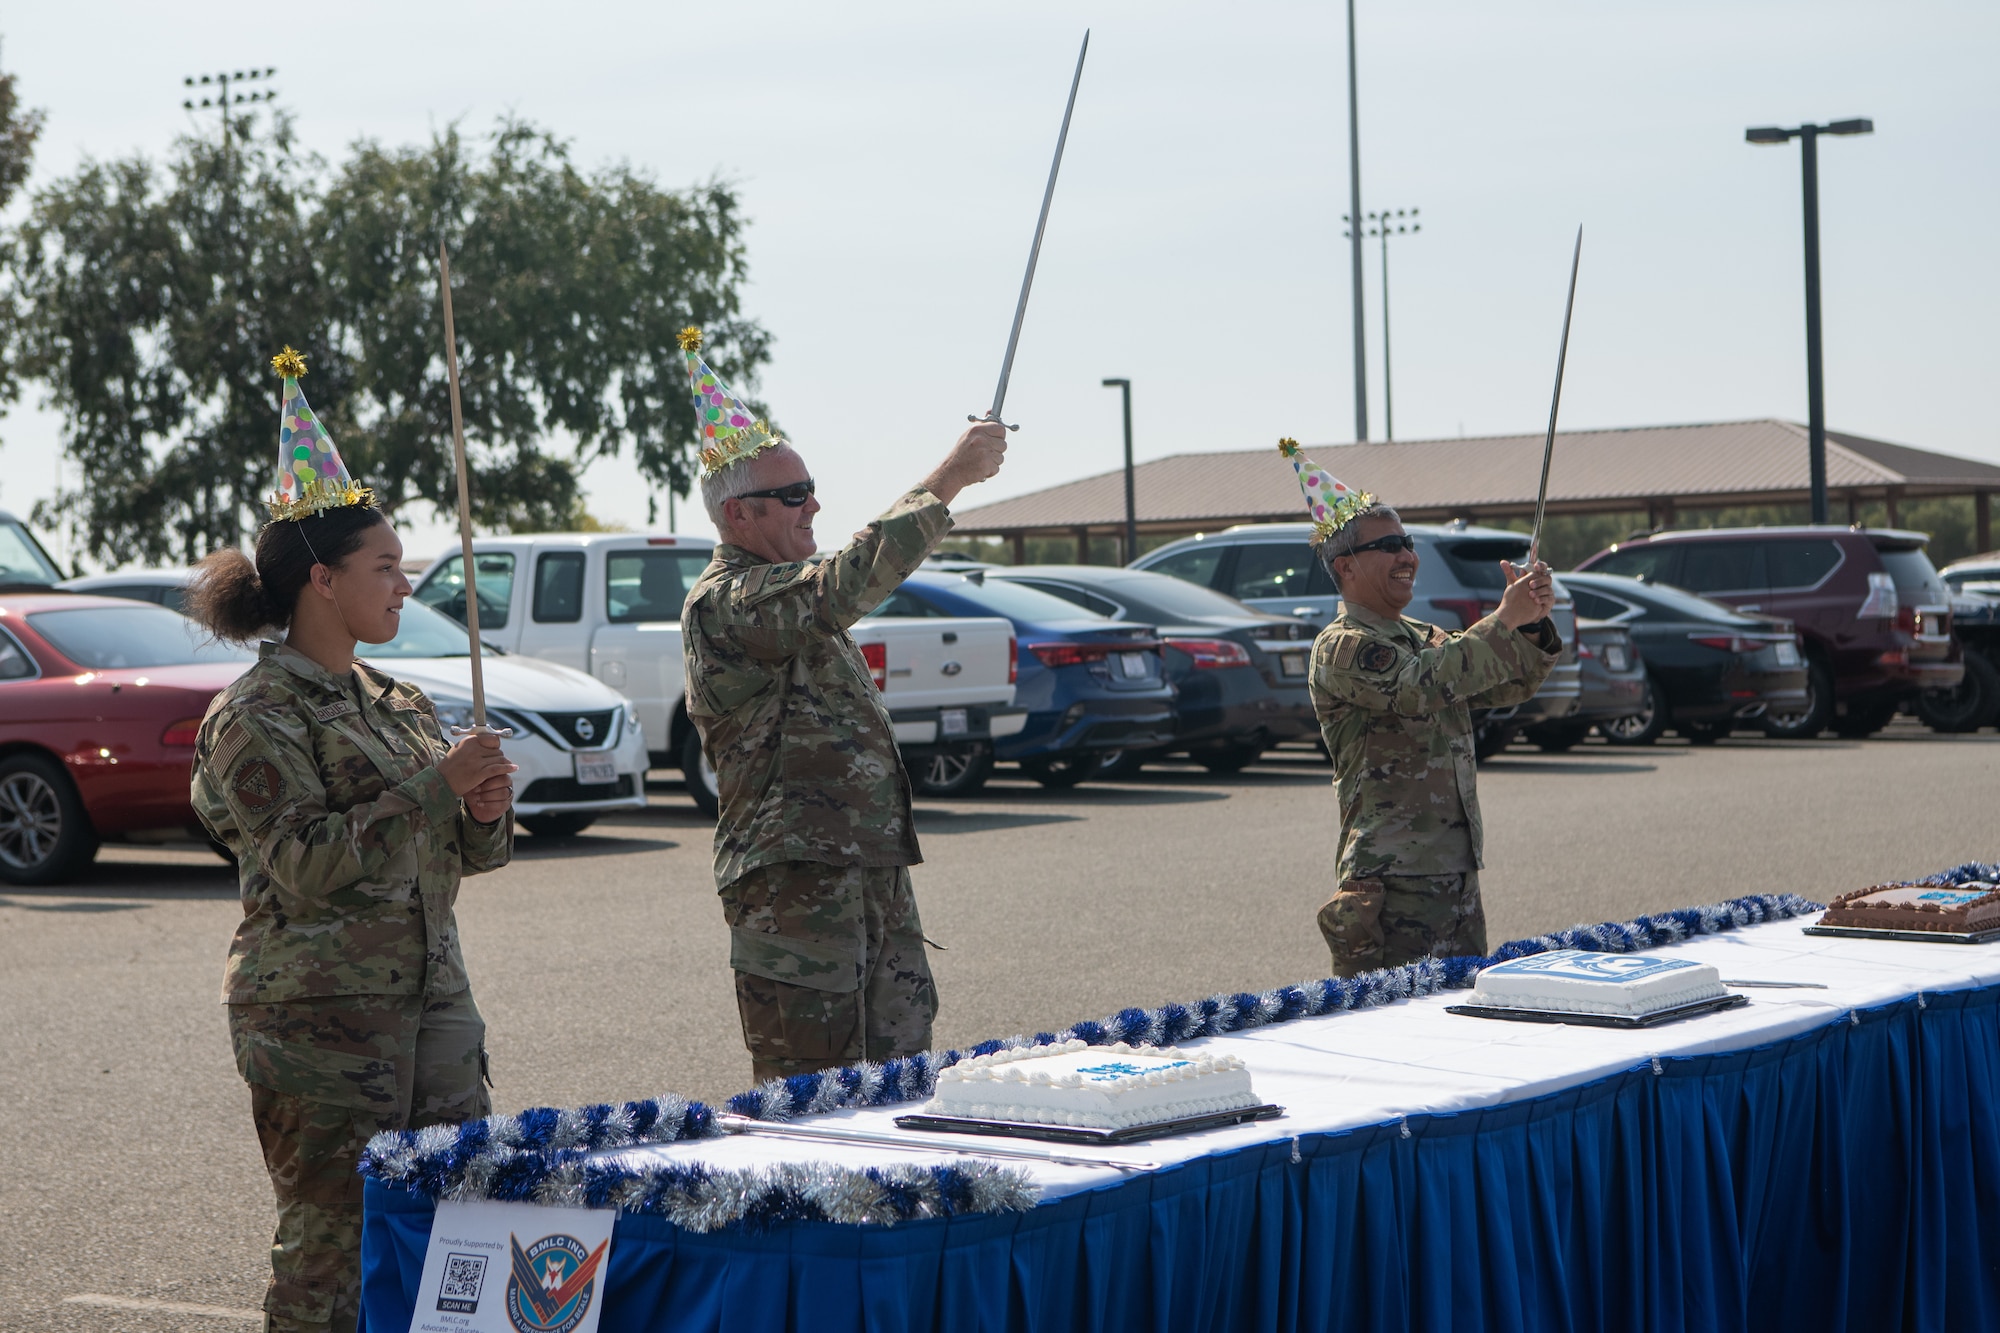 Col. Jason Eckberg (middle), Chaplain Mario (right) perform a cake cutting ceremony at Beale Air Force Base, Cali. on Sept. 16, 2022.